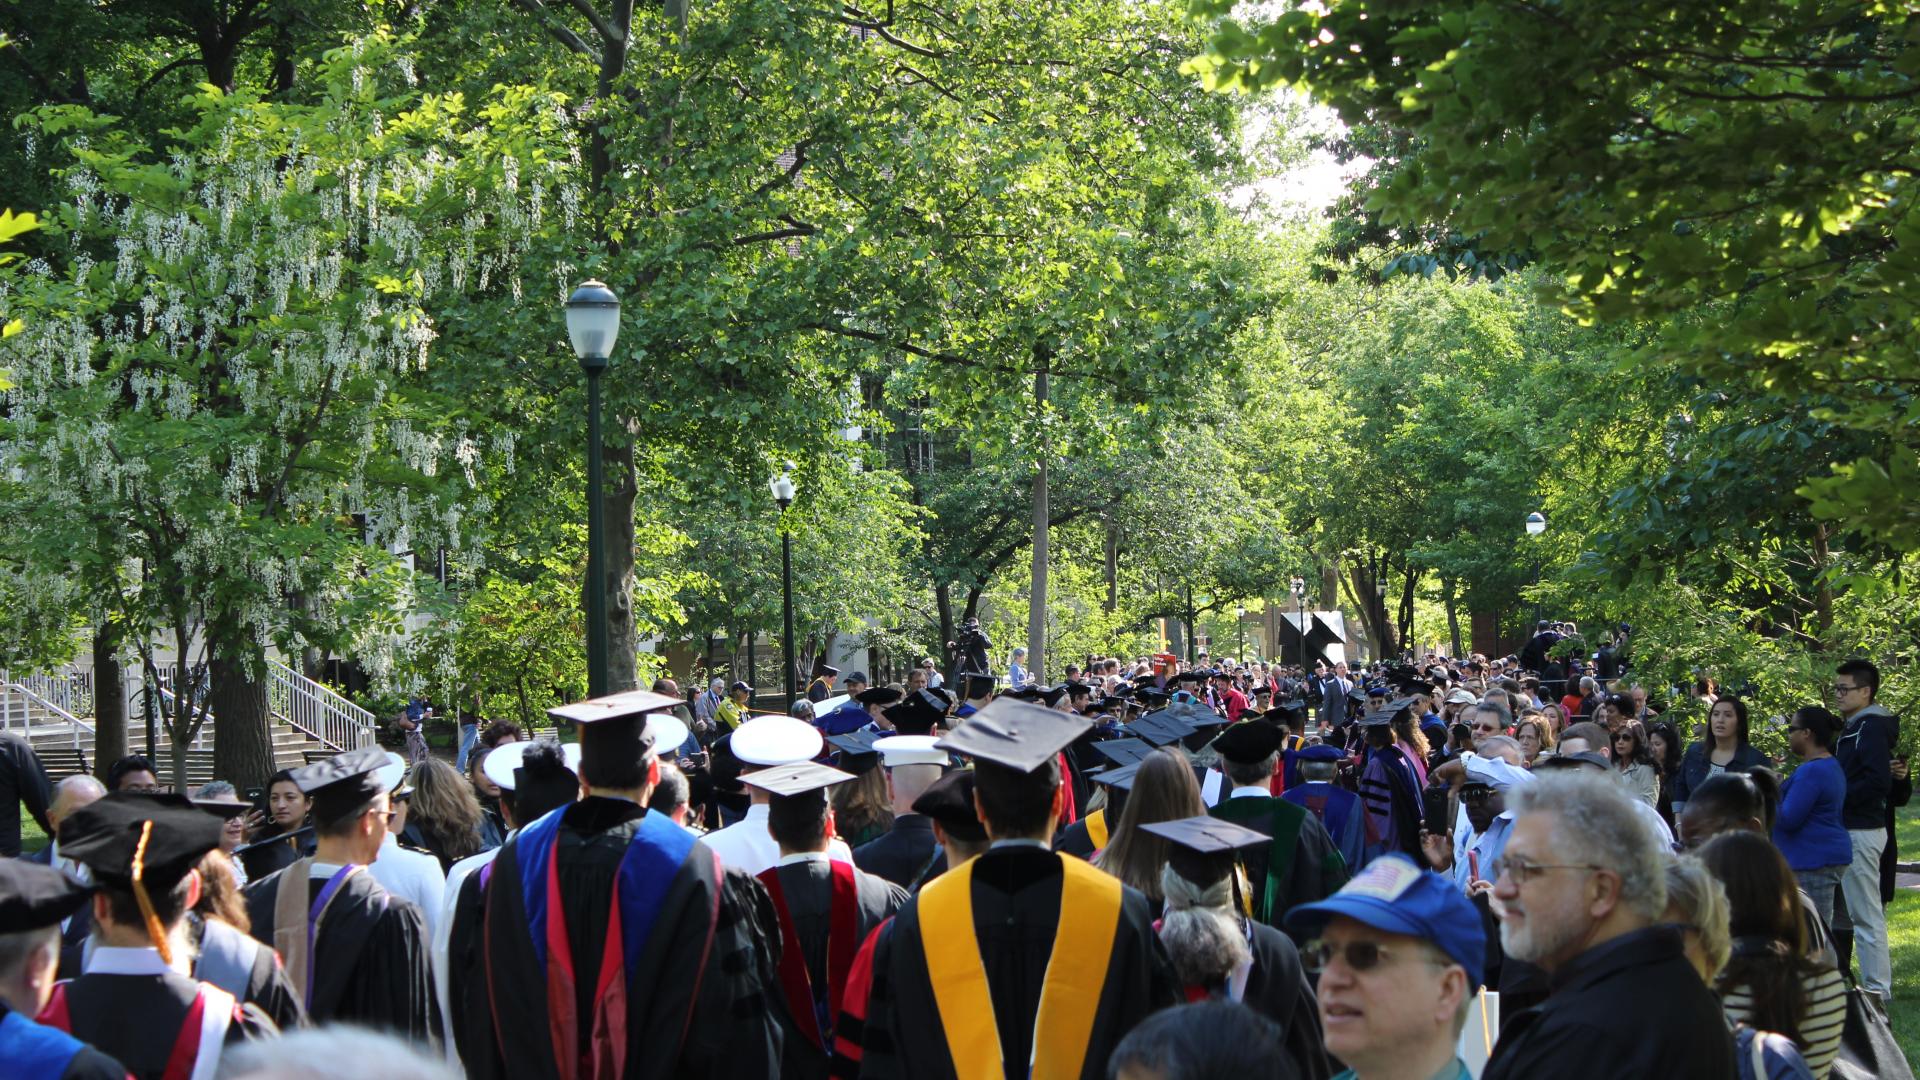 Students and families on Locust Walk for Commencement